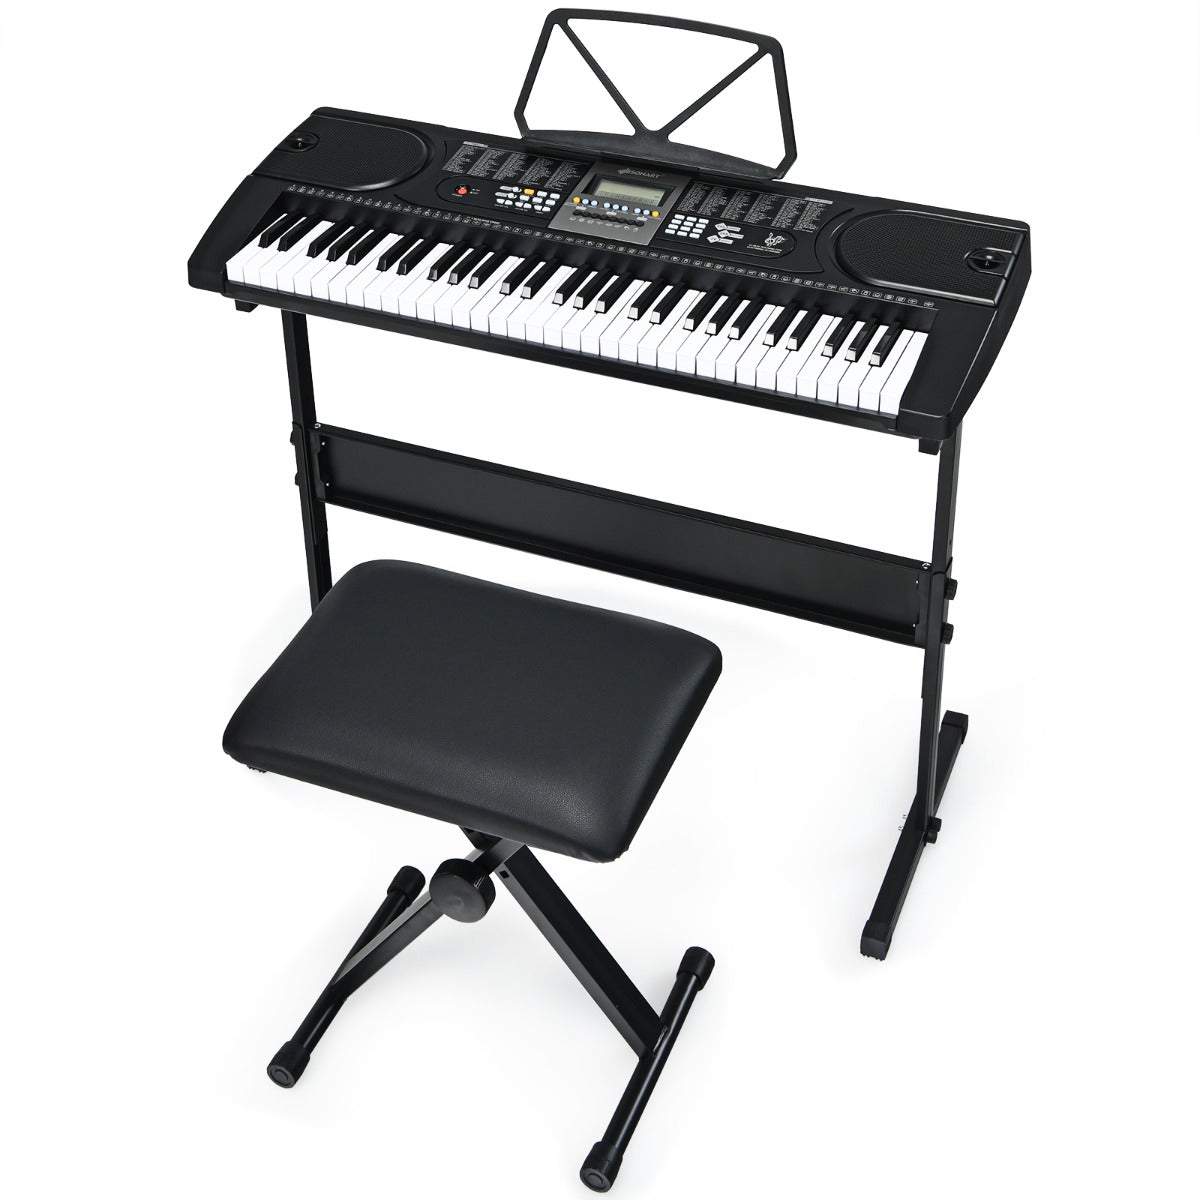 Express Yourself Musically - 61-Key Electric Piano Keyboard with Mic & Headphone